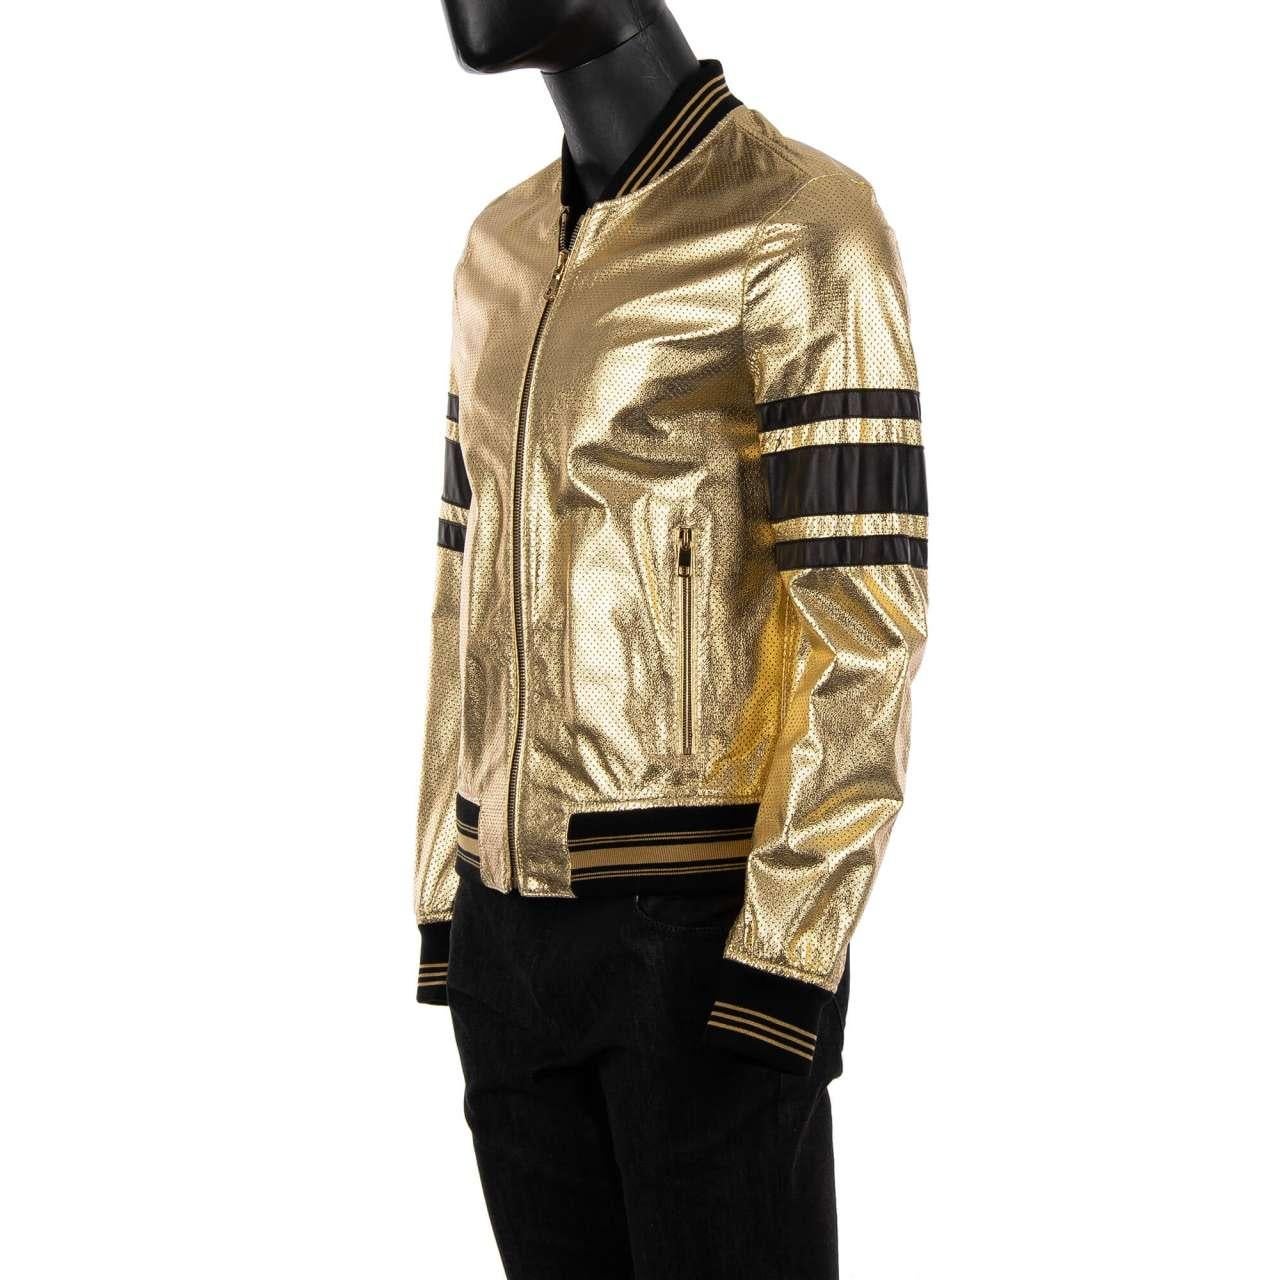 Dolce & Gabbana Perforated Leather Jacket Gold Black 46 For Sale 2